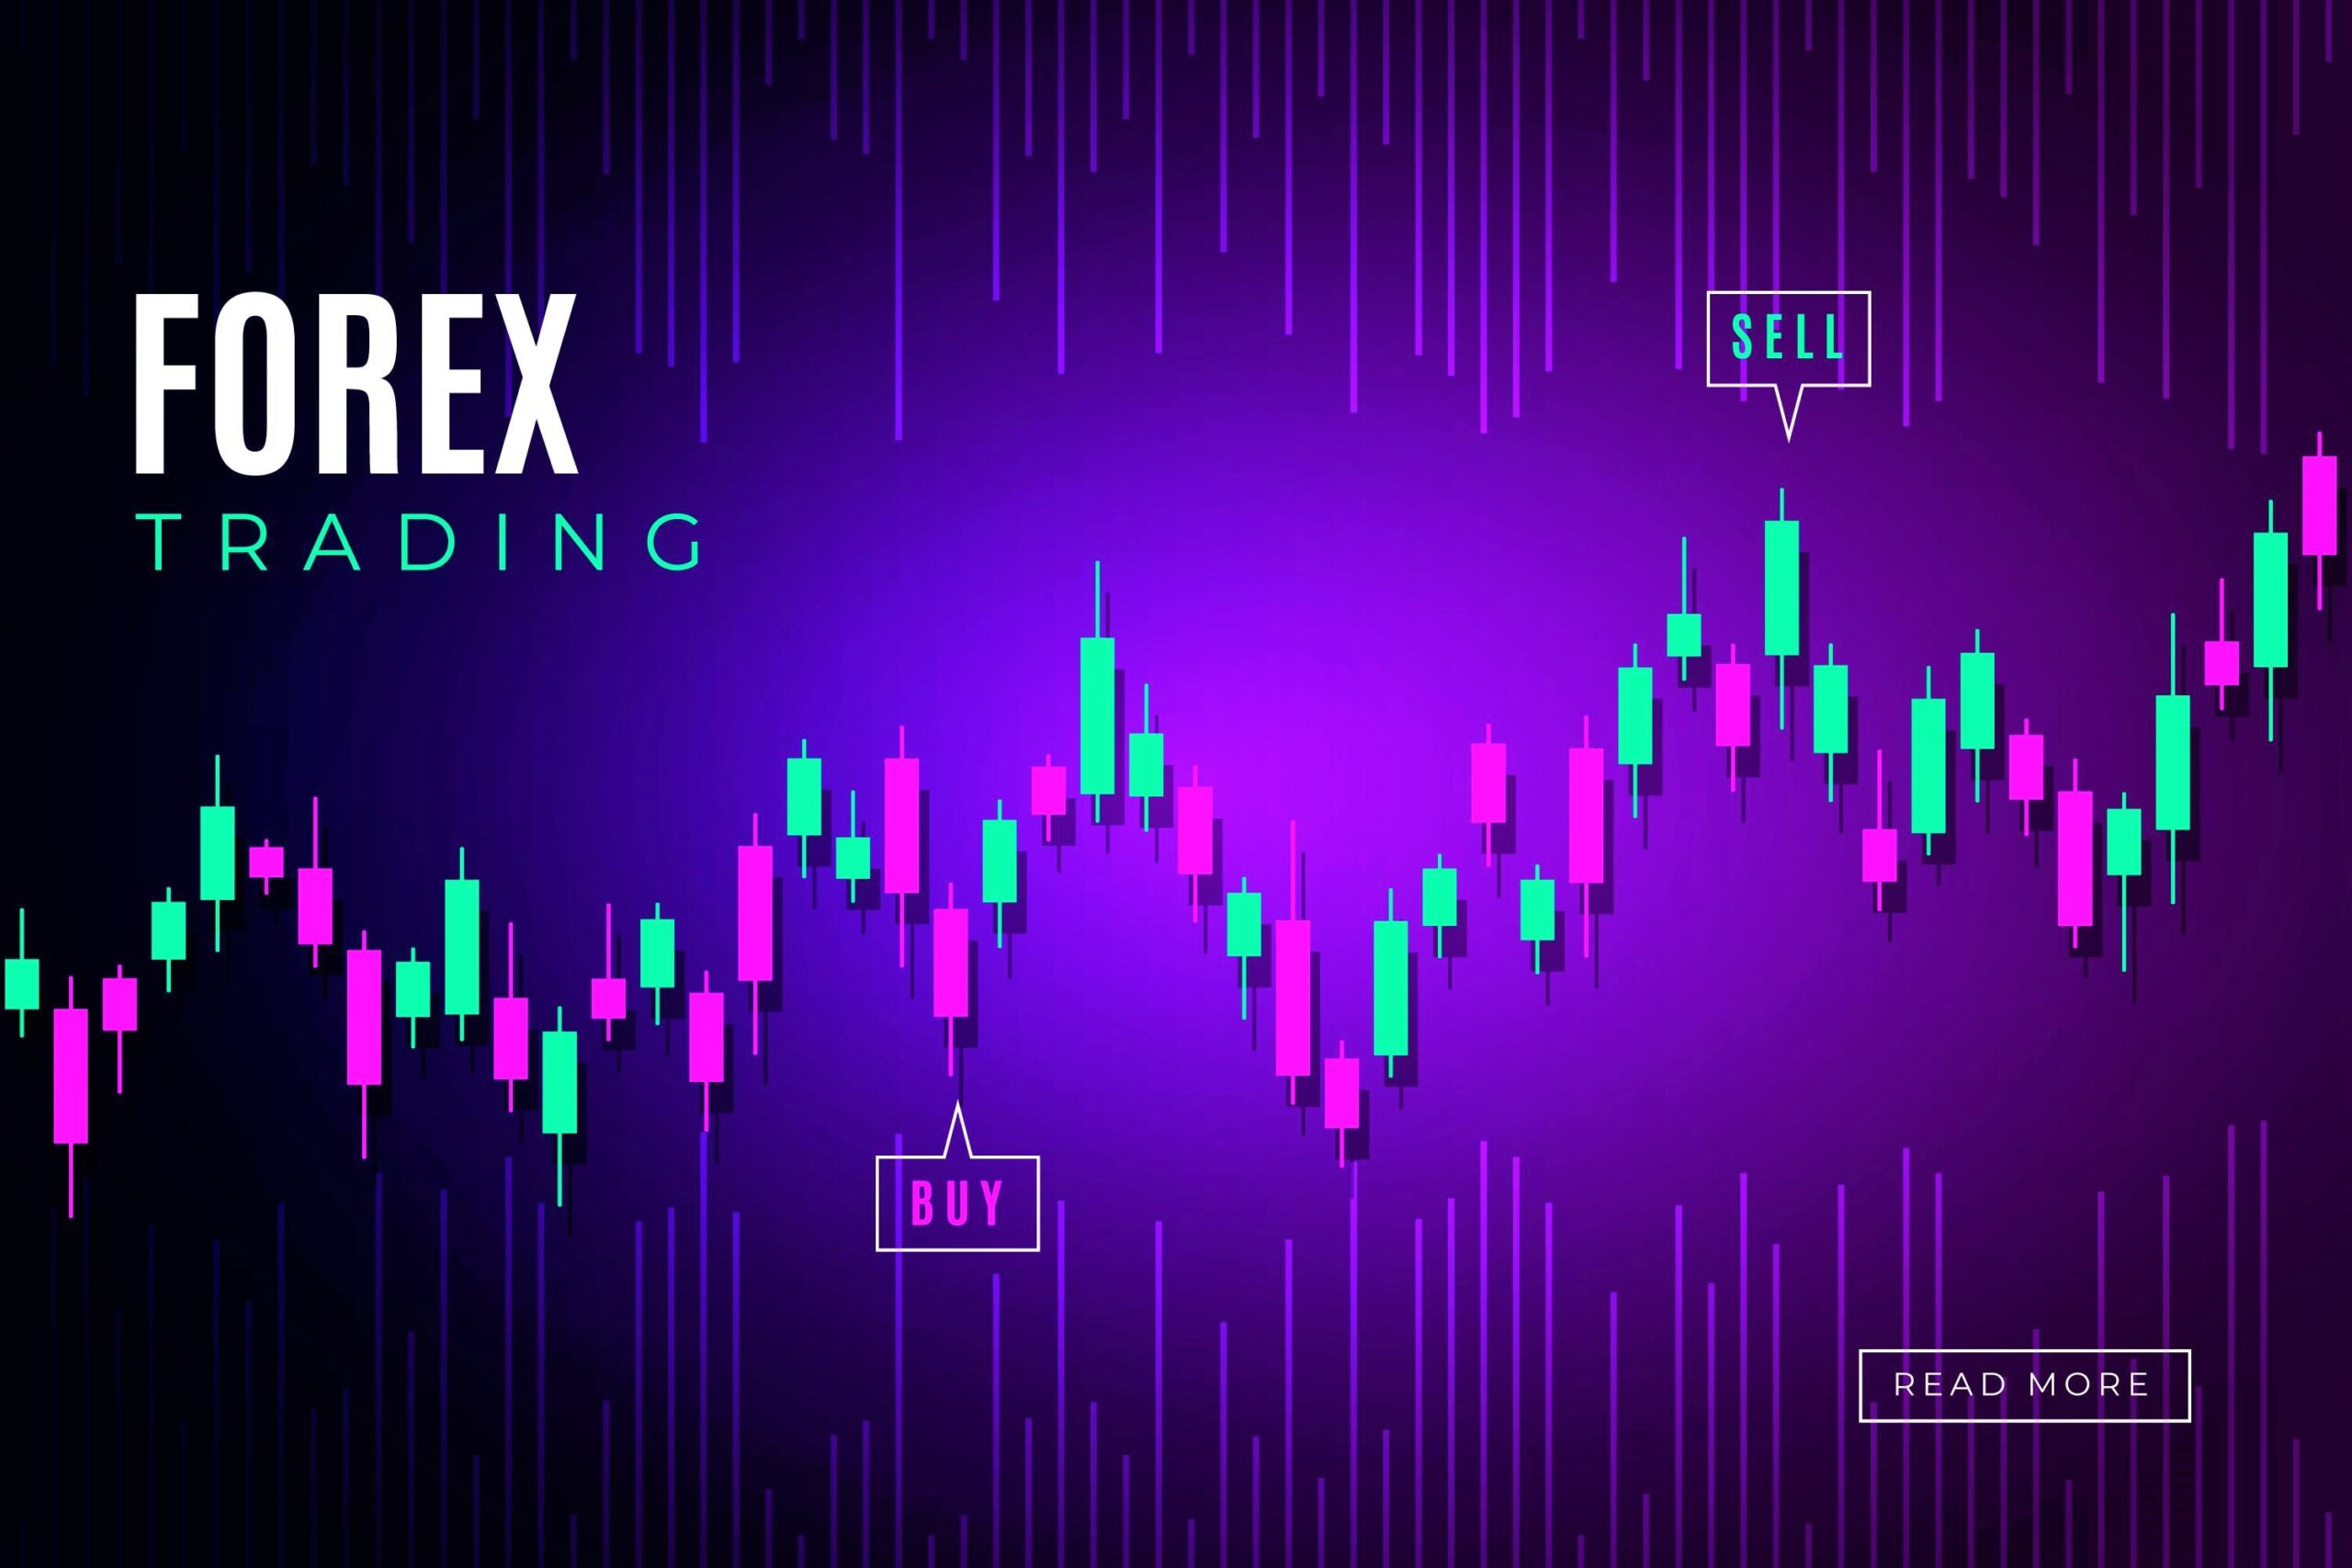 Forex Trading is your Number 1 Business Idea in Kenya for 2021